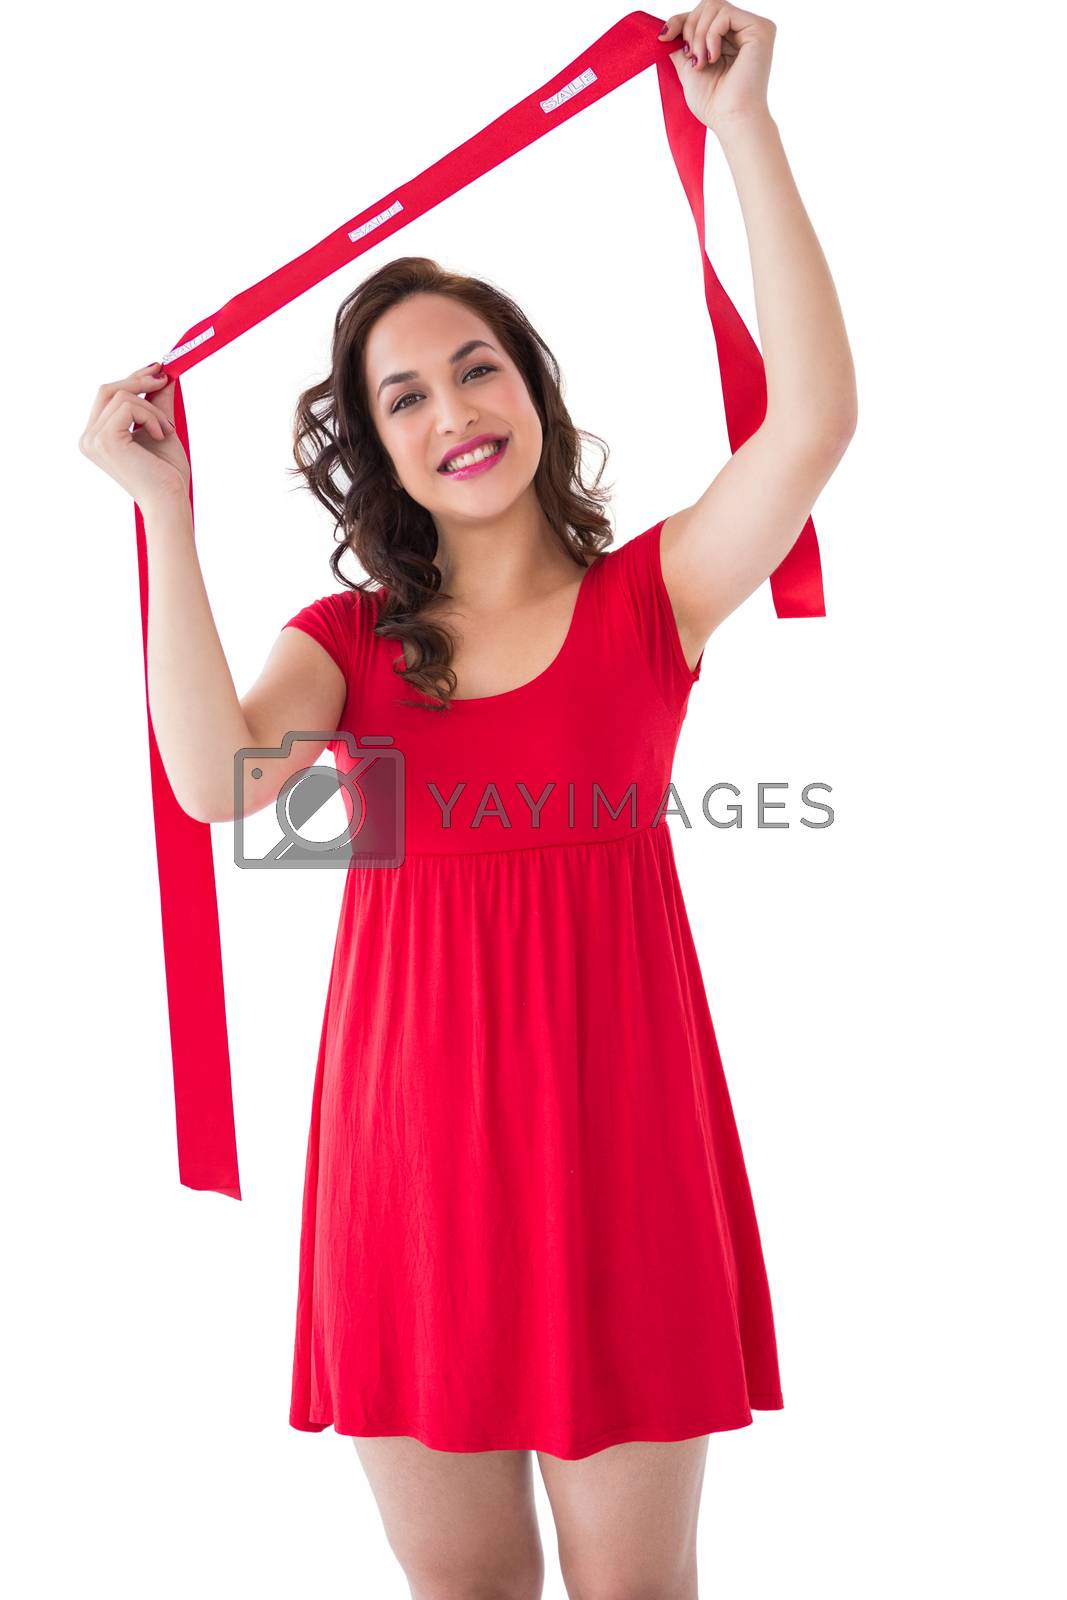 Royalty free image of Happy brunette in red dress holding scarf  by Wavebreakmedia